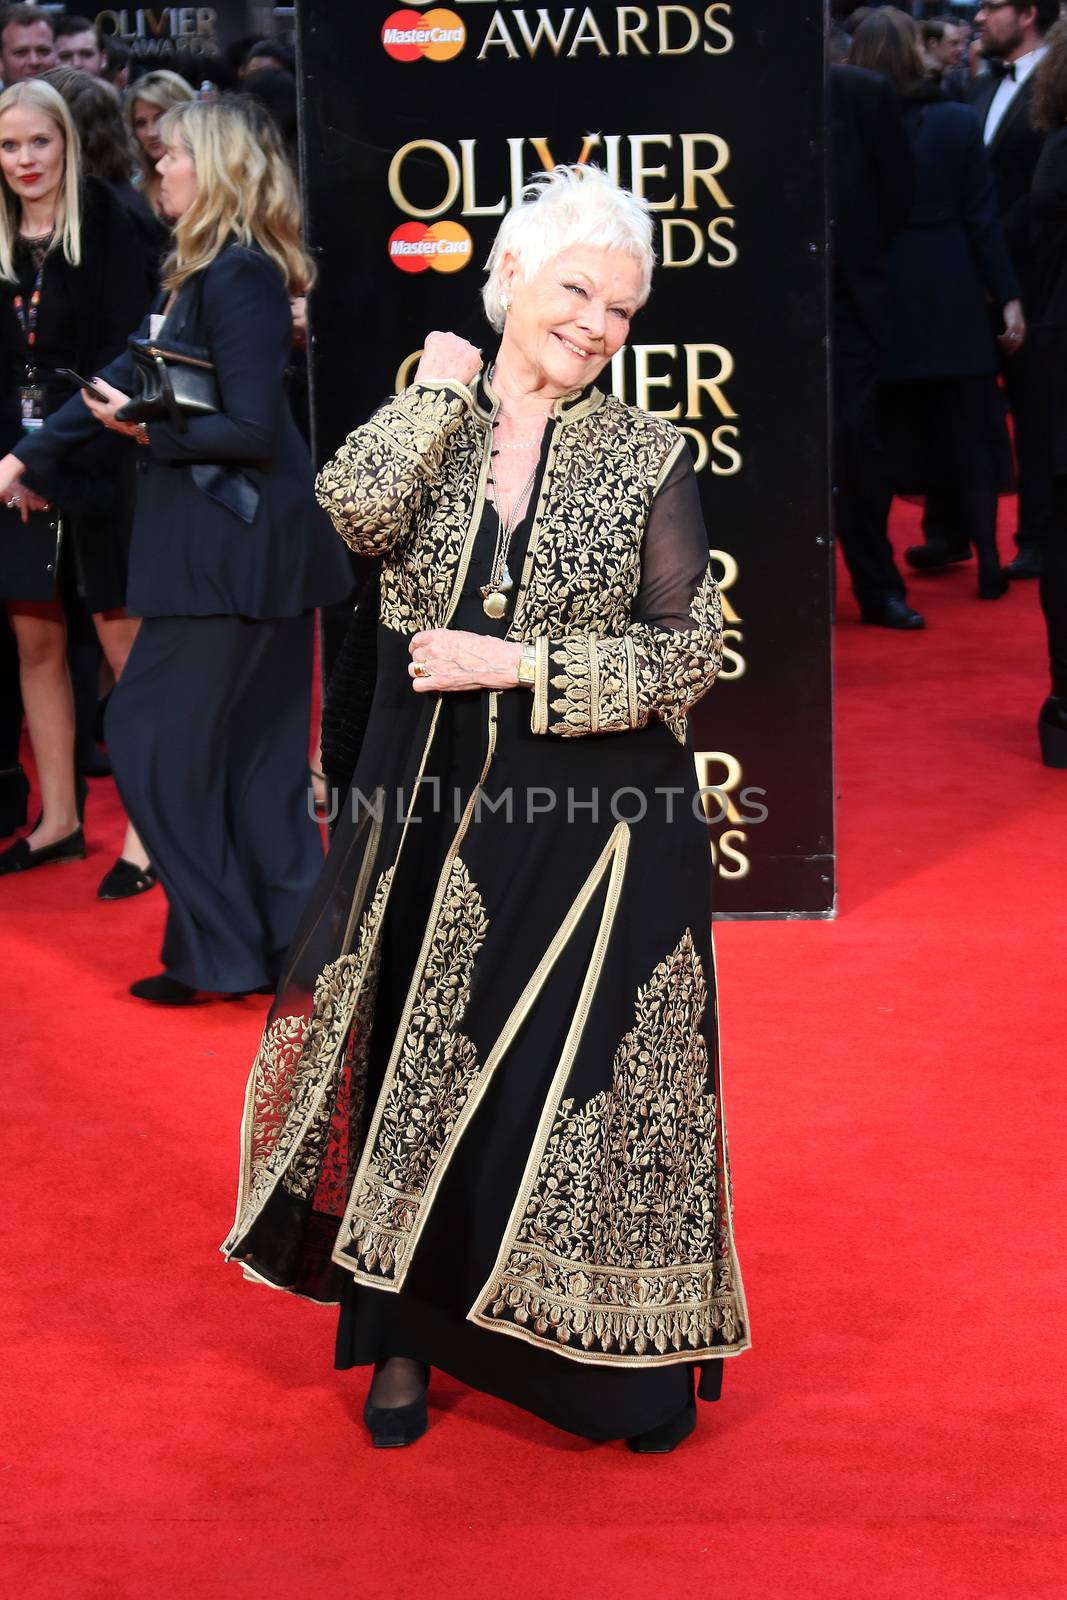 UK, London: Judi Dench hits the red carpet for the Olivier Awards at the Royal Opera House in London on April 3, 2016.